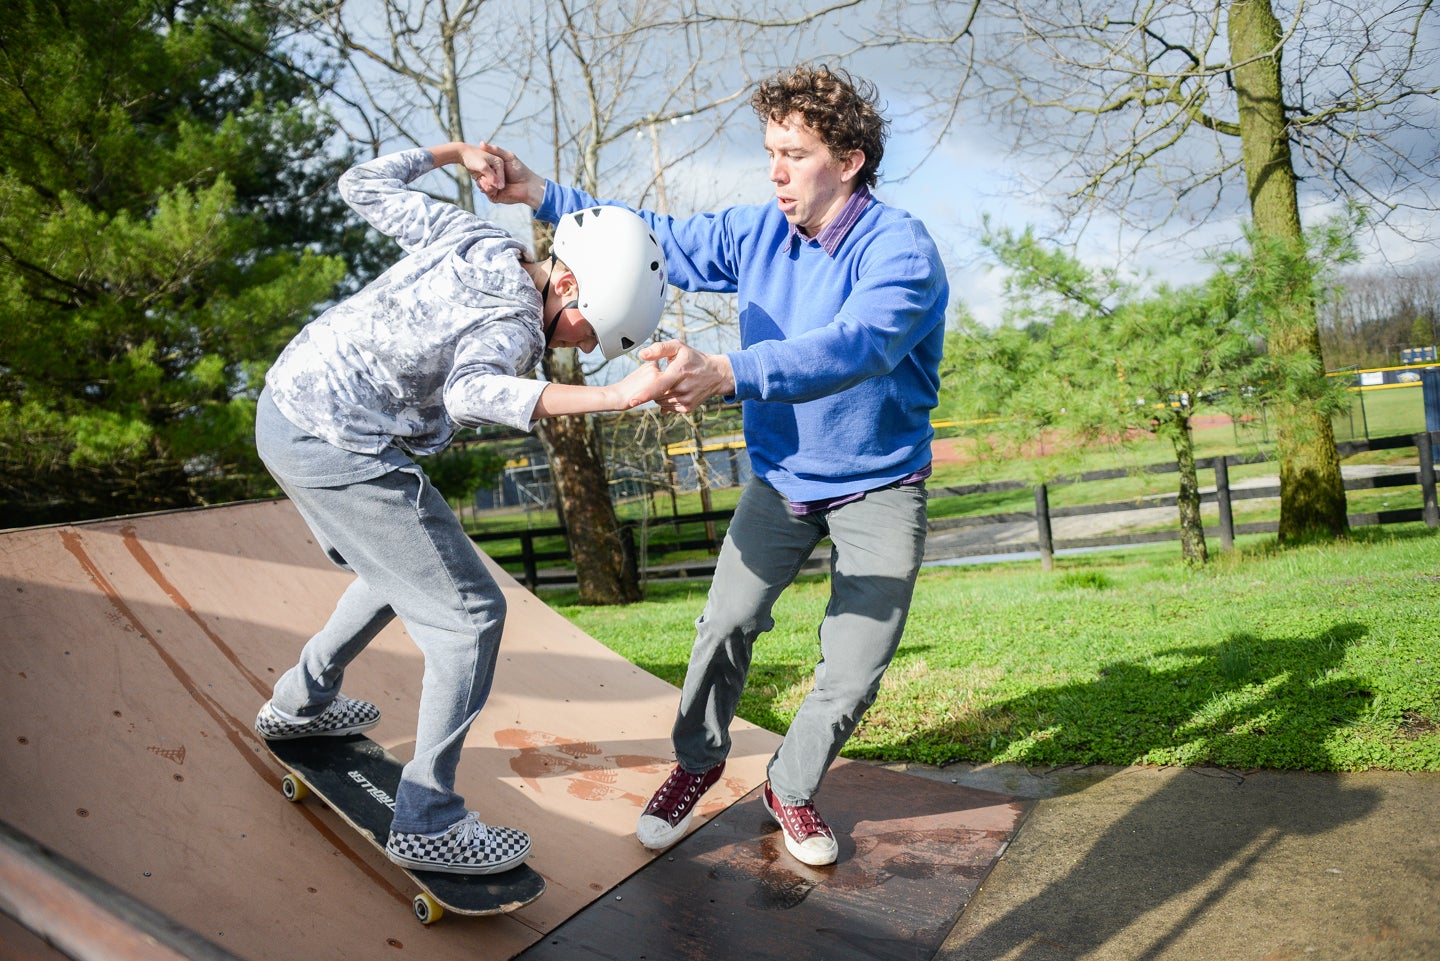 Drop into summer with Road Dog Skate Camp